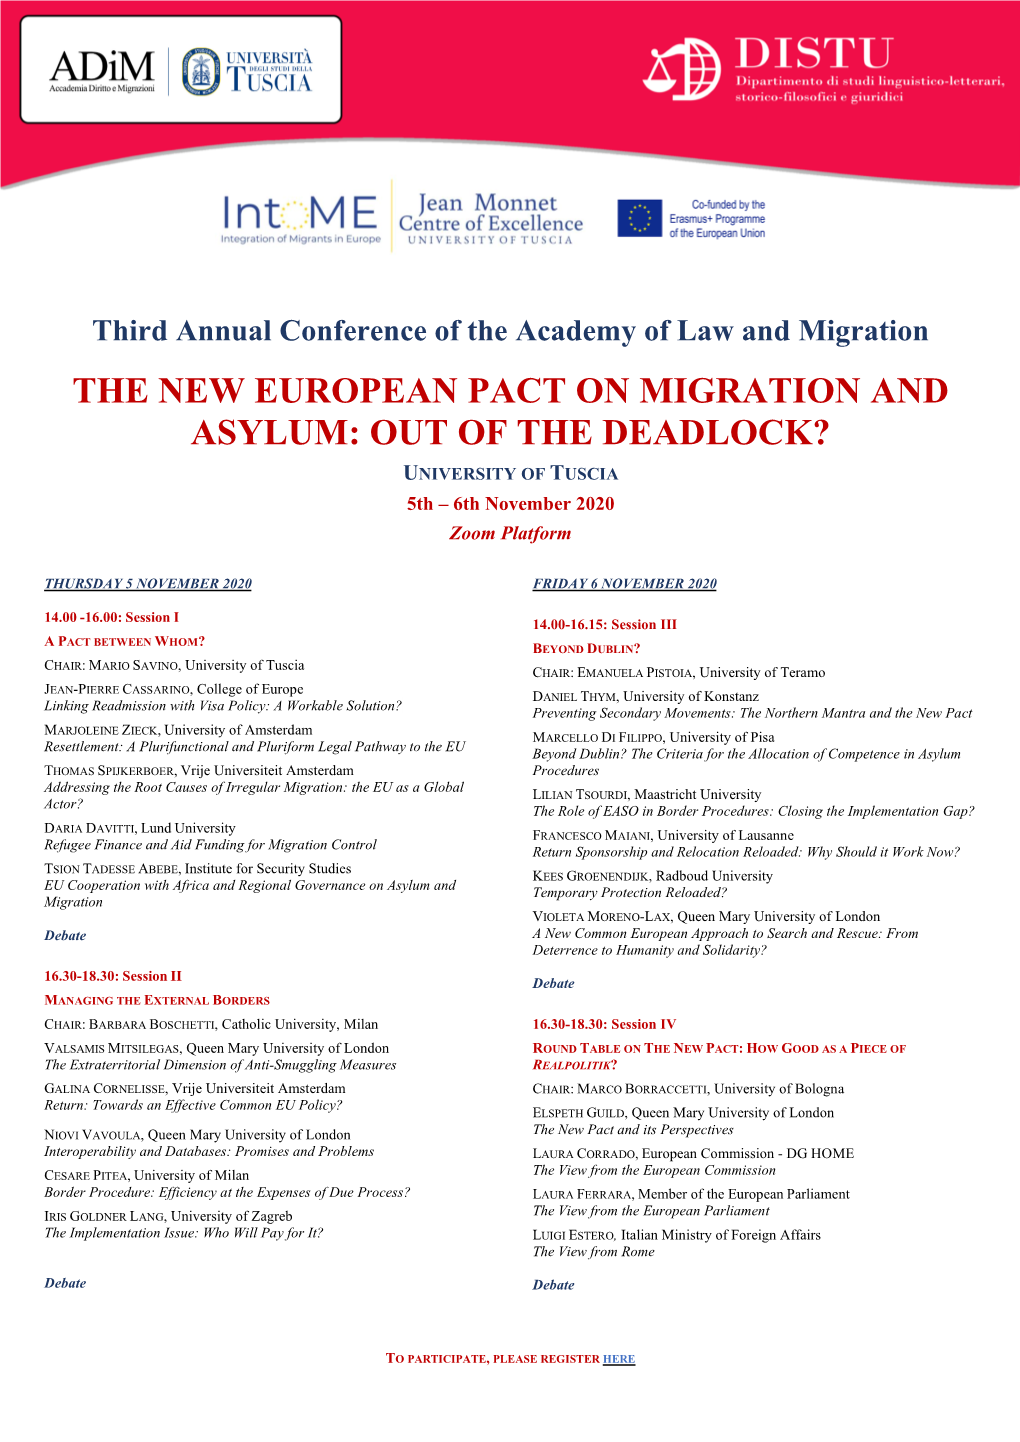 THE NEW EUROPEAN PACT on MIGRATION and ASYLUM: out of the DEADLOCK? UNIVERSITY of TUSCIA 5Th – 6Th November 2020 Zoom Platform